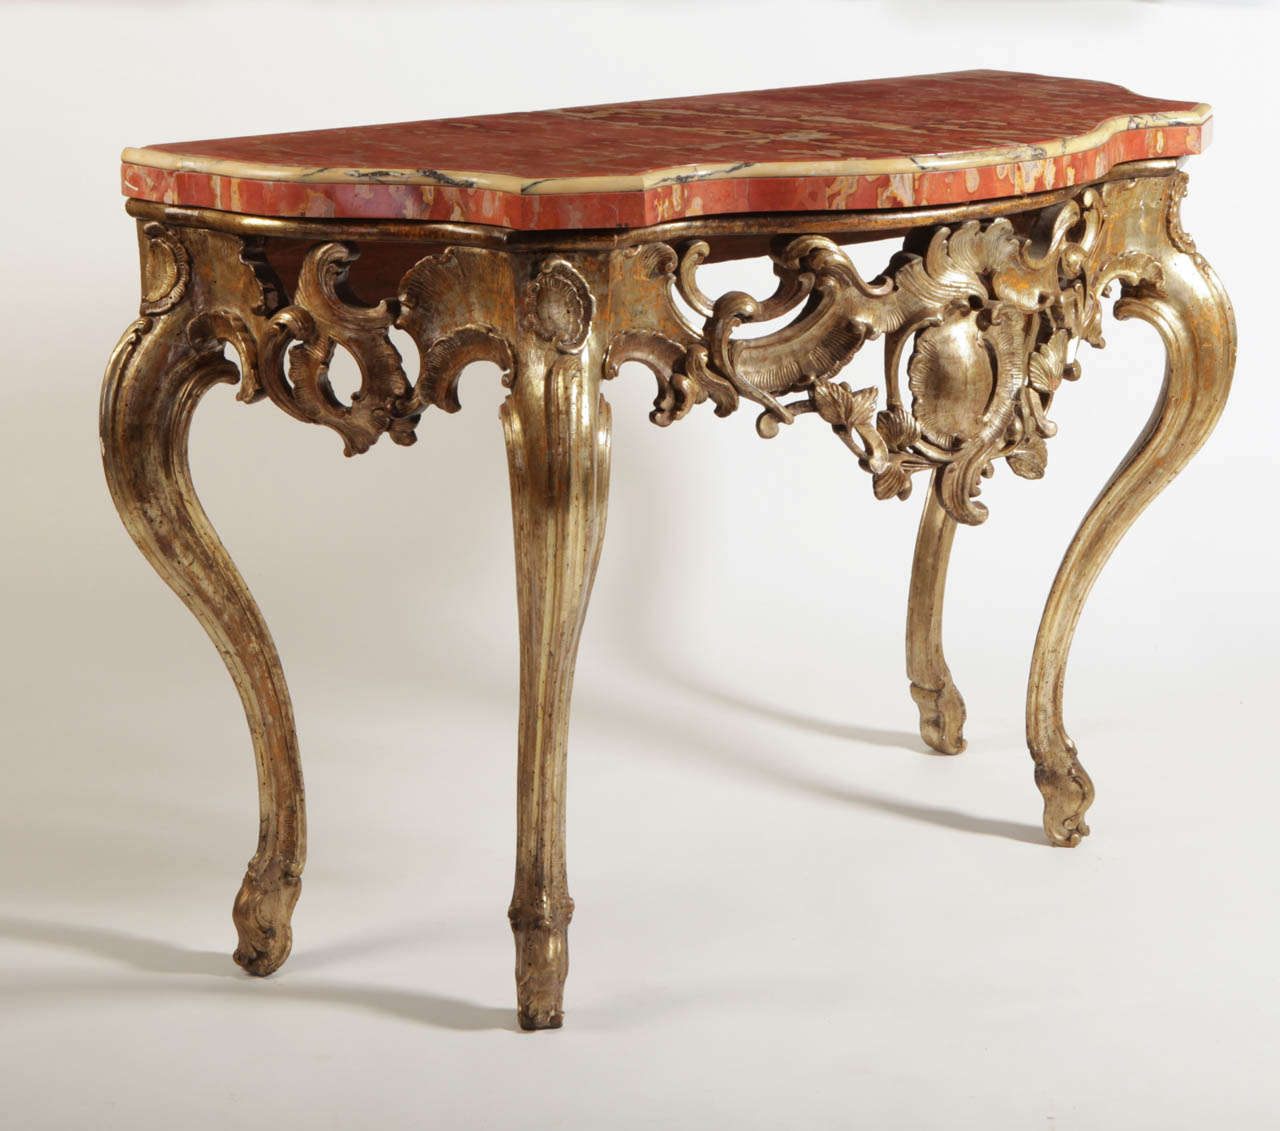 A fine Italian  19' century gilt-wood console Table with a Marble Top .